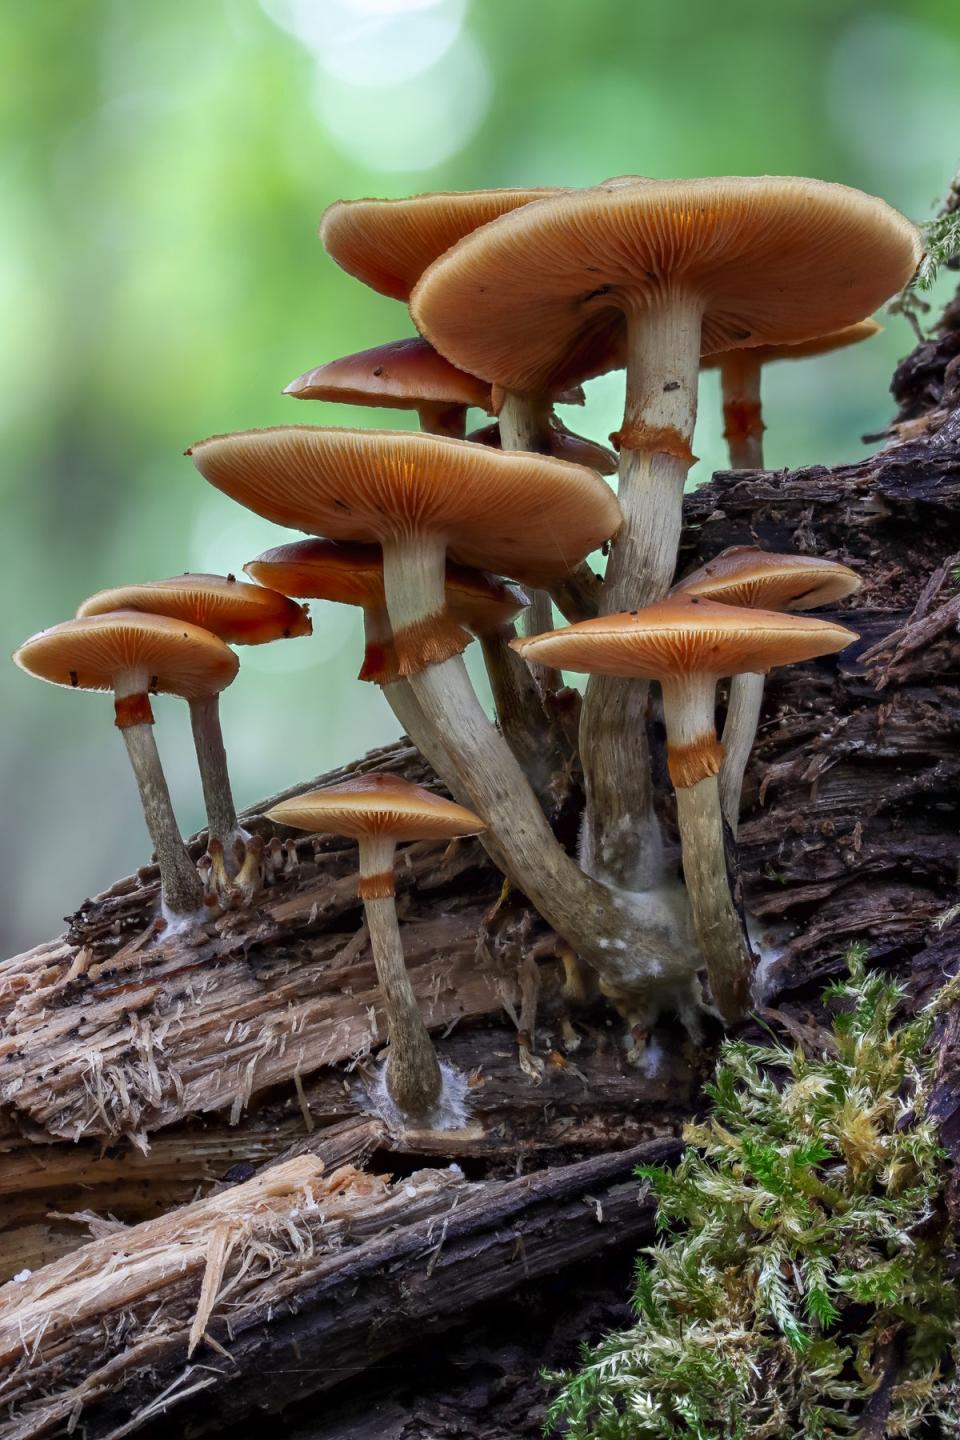 Funeral Bell mushrooms are found all year round on rotting logs and woodchips (André De Kesel/Wikimedia Commons CC0)